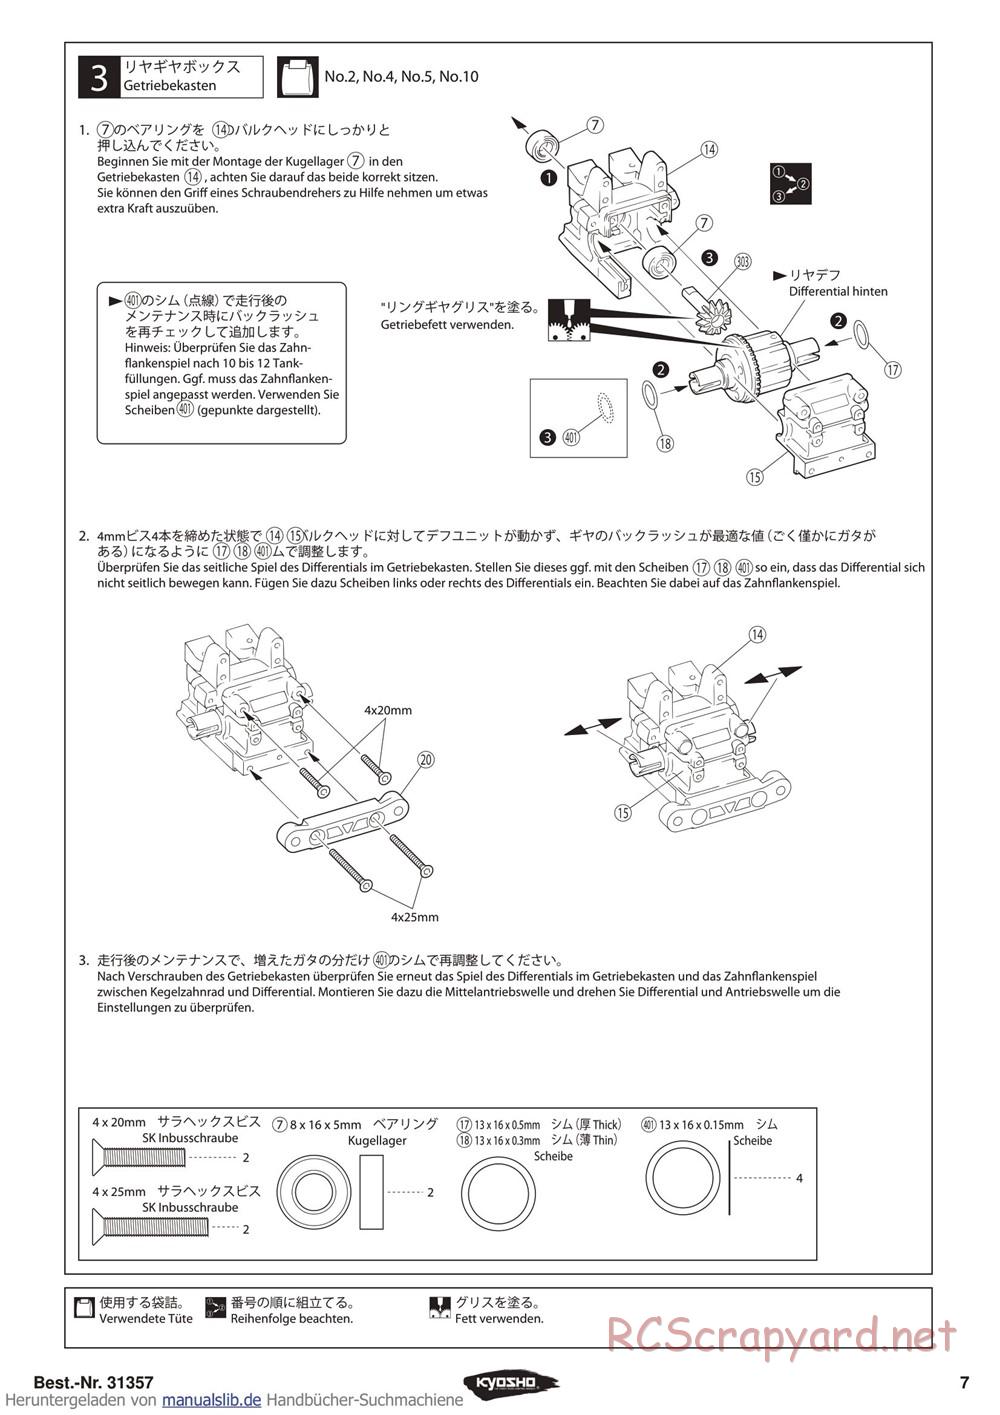 Kyosho - Inferno ST-RR Evo - Manual - Page 7